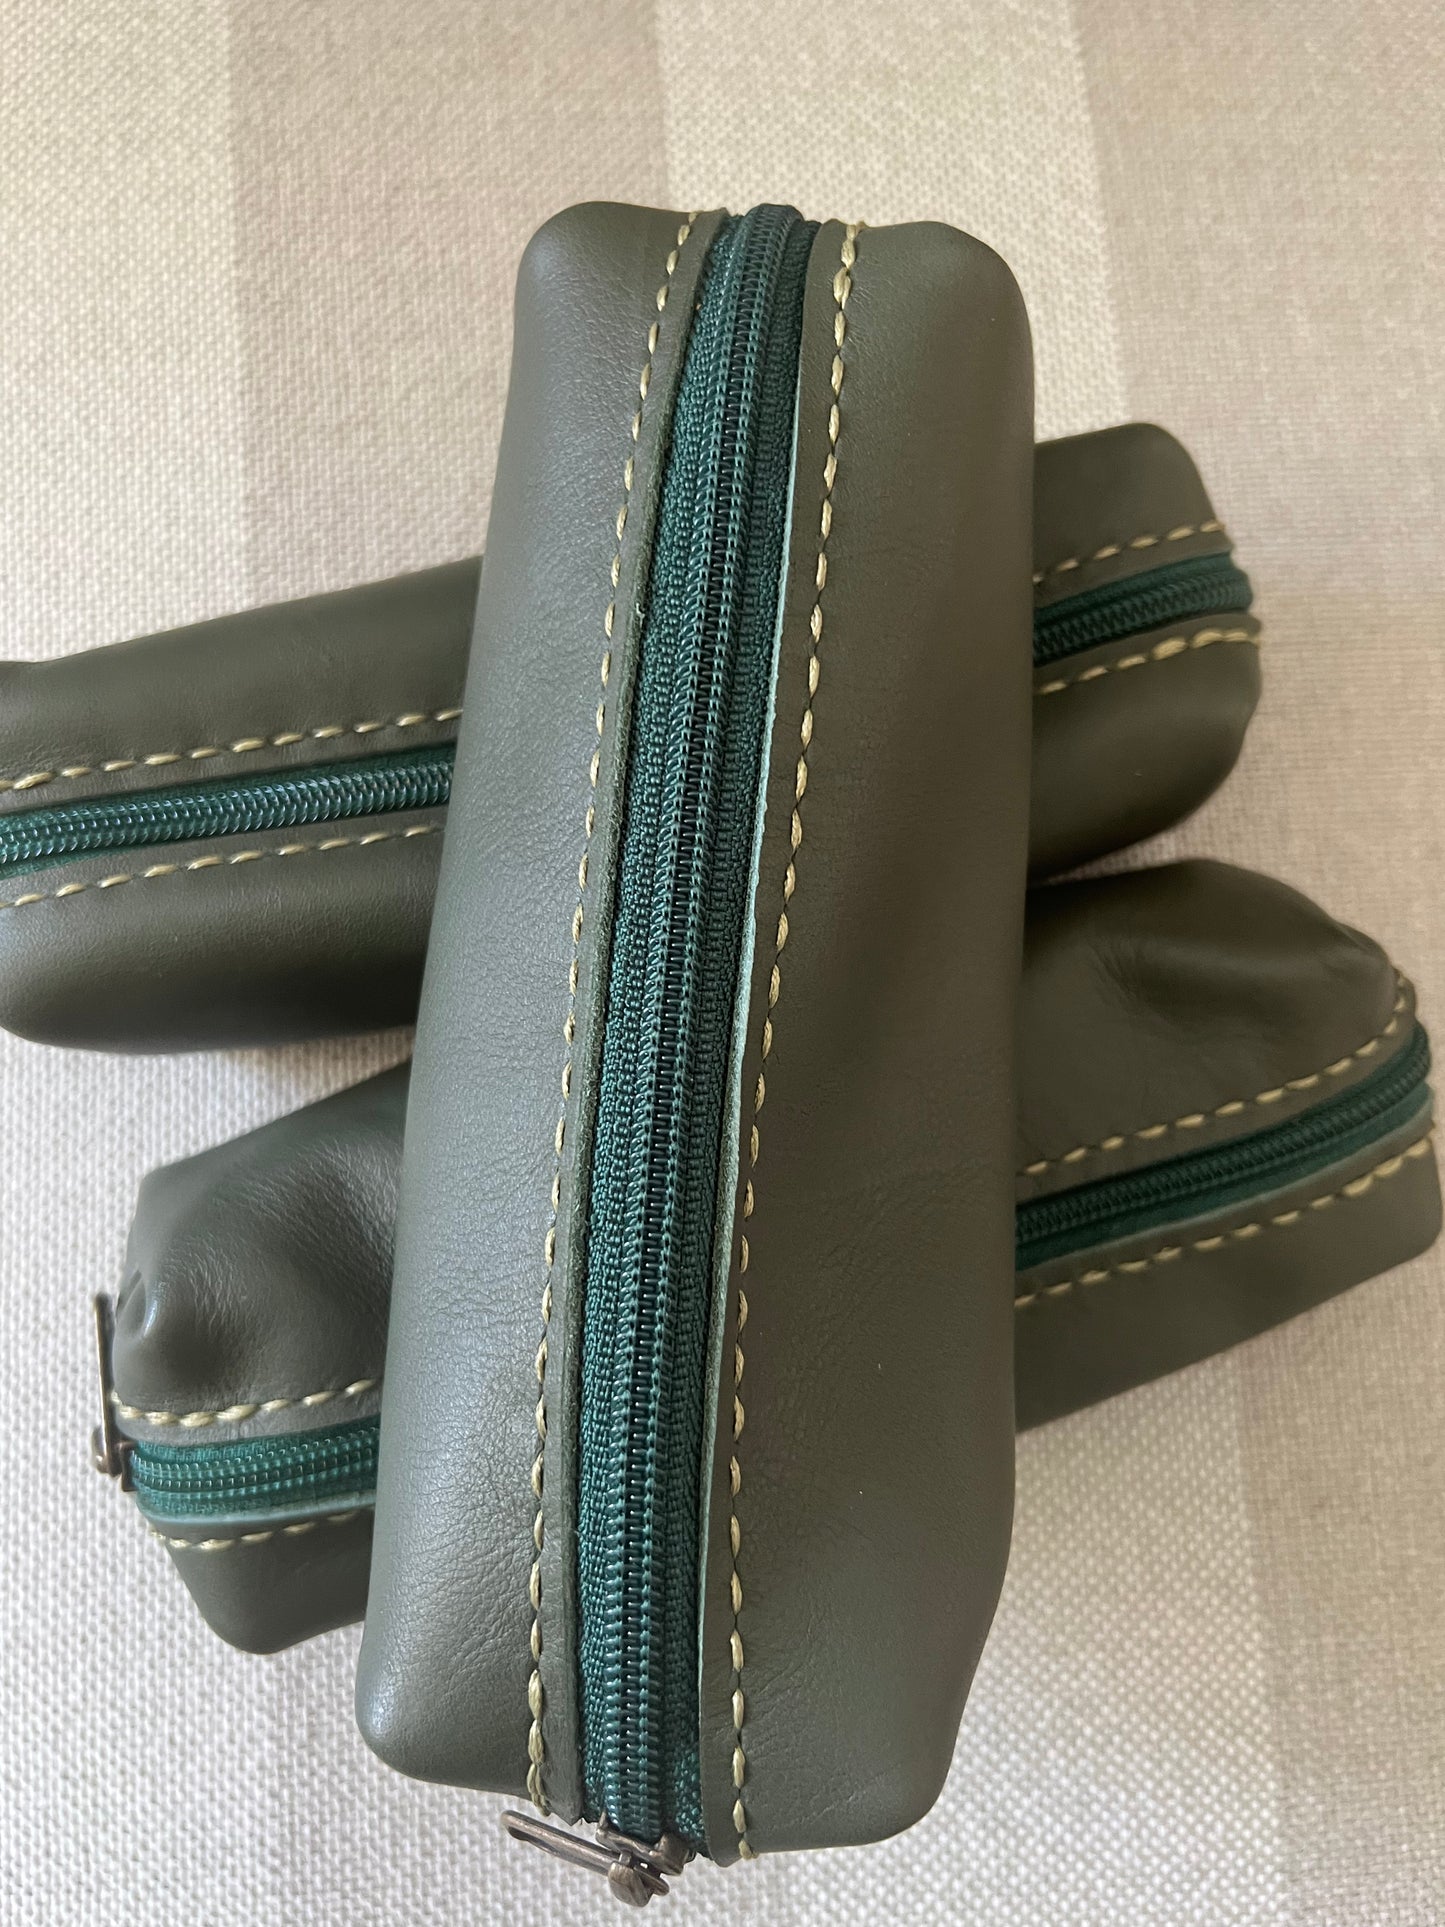 Leather Zip notion pouches - 100% leather - Hand Made